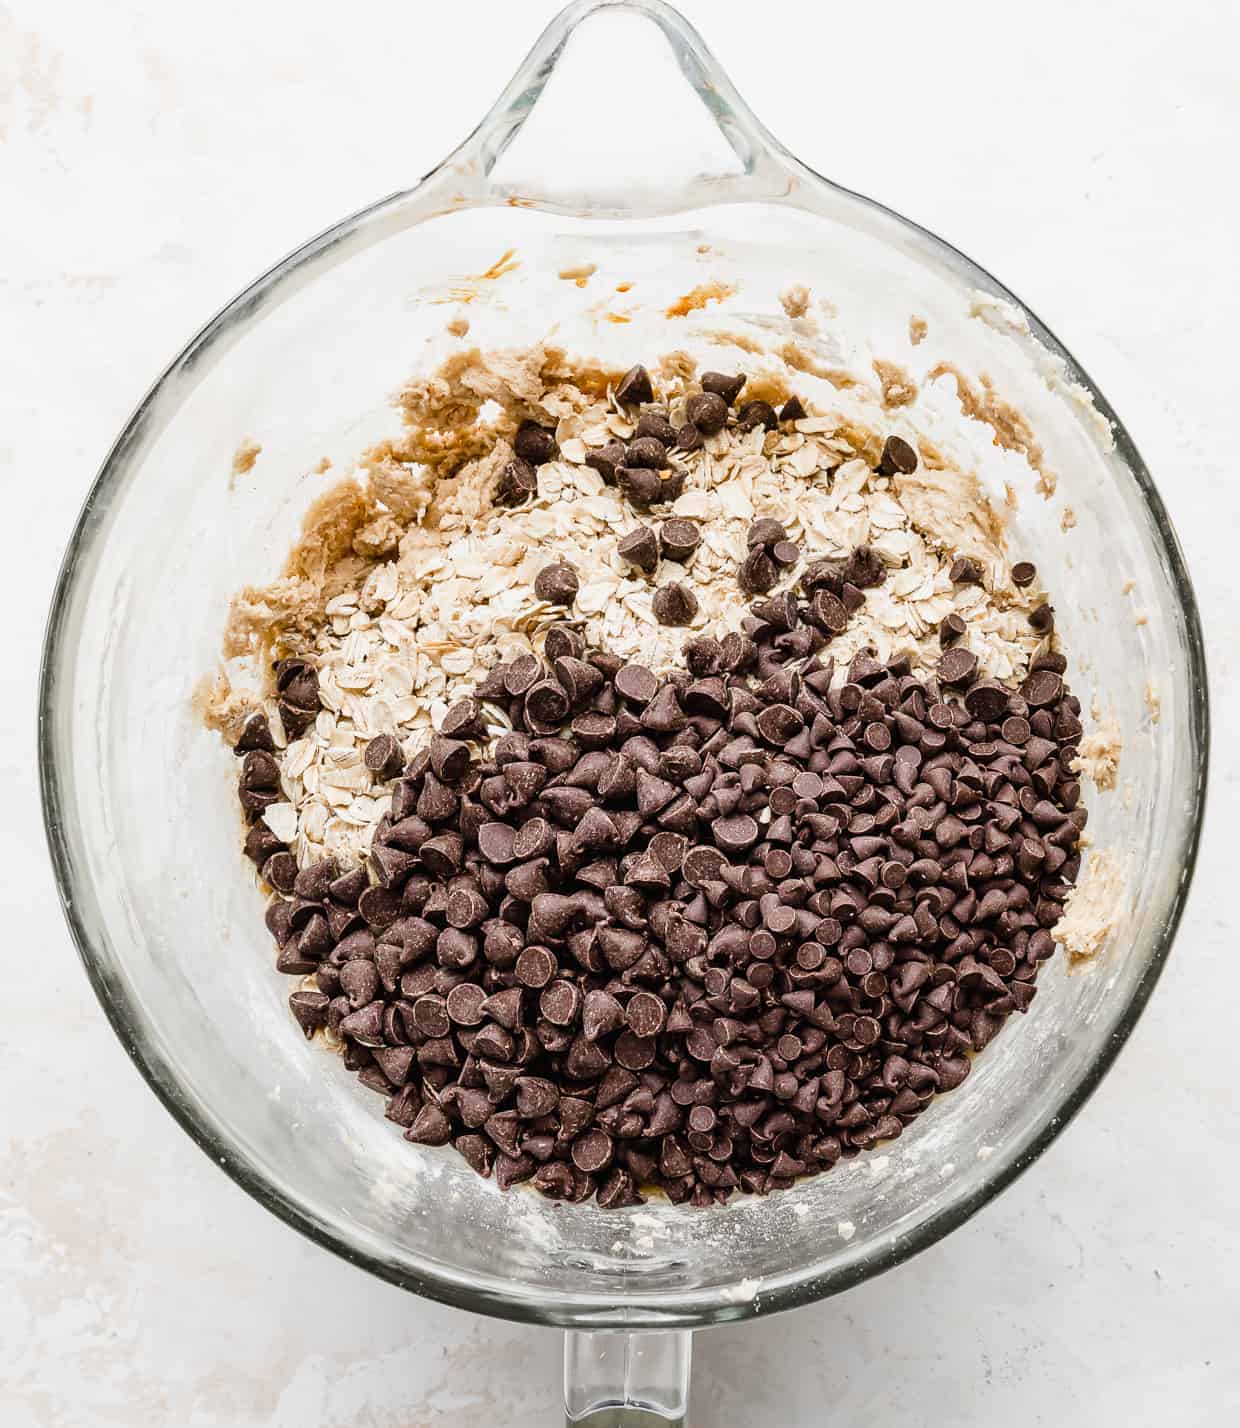 Chocolate chips and rolled oats in a stand mixer bowl.